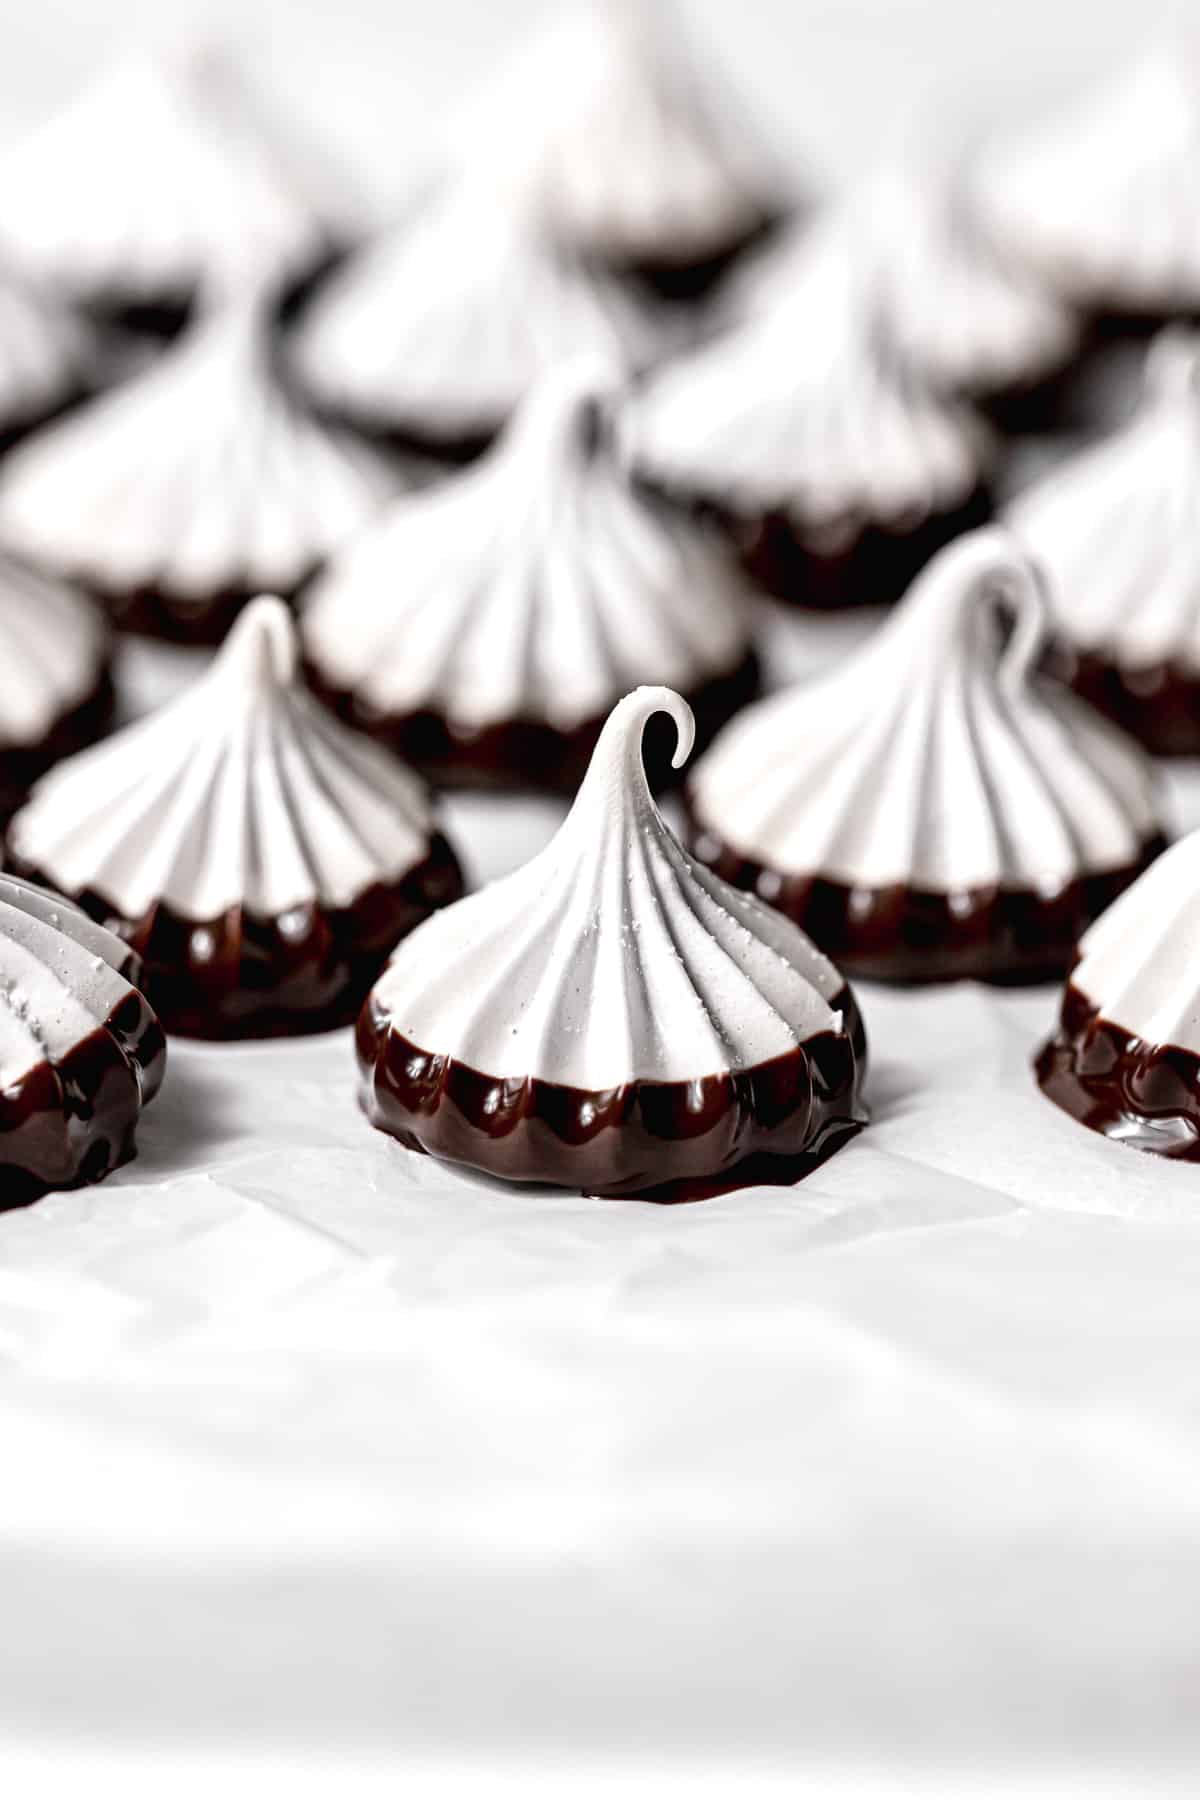 chocolate dipped meringue cookies on parchment paper.